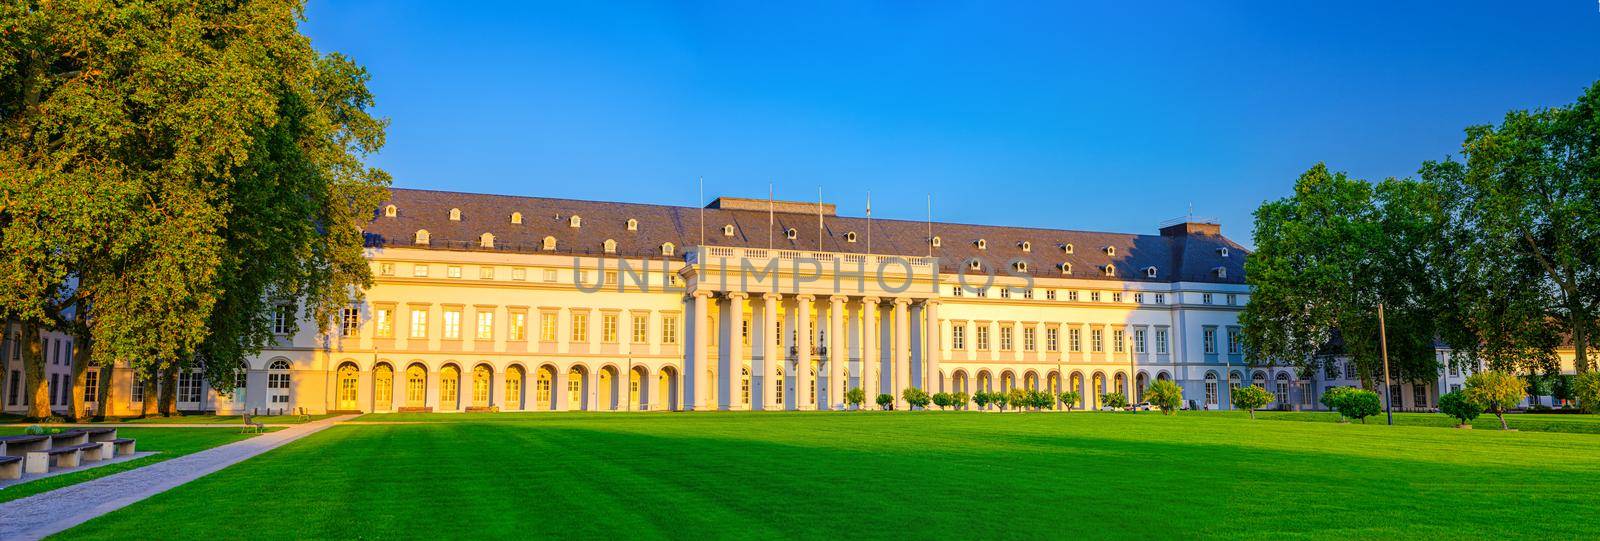 Koblenz, Germany, August 23, 2019: Electoral Palace Schloss building and Schlossvorplatz green grass lawn square in Koblenz historical city centre, blue sky background, Rhineland-Palatinate state